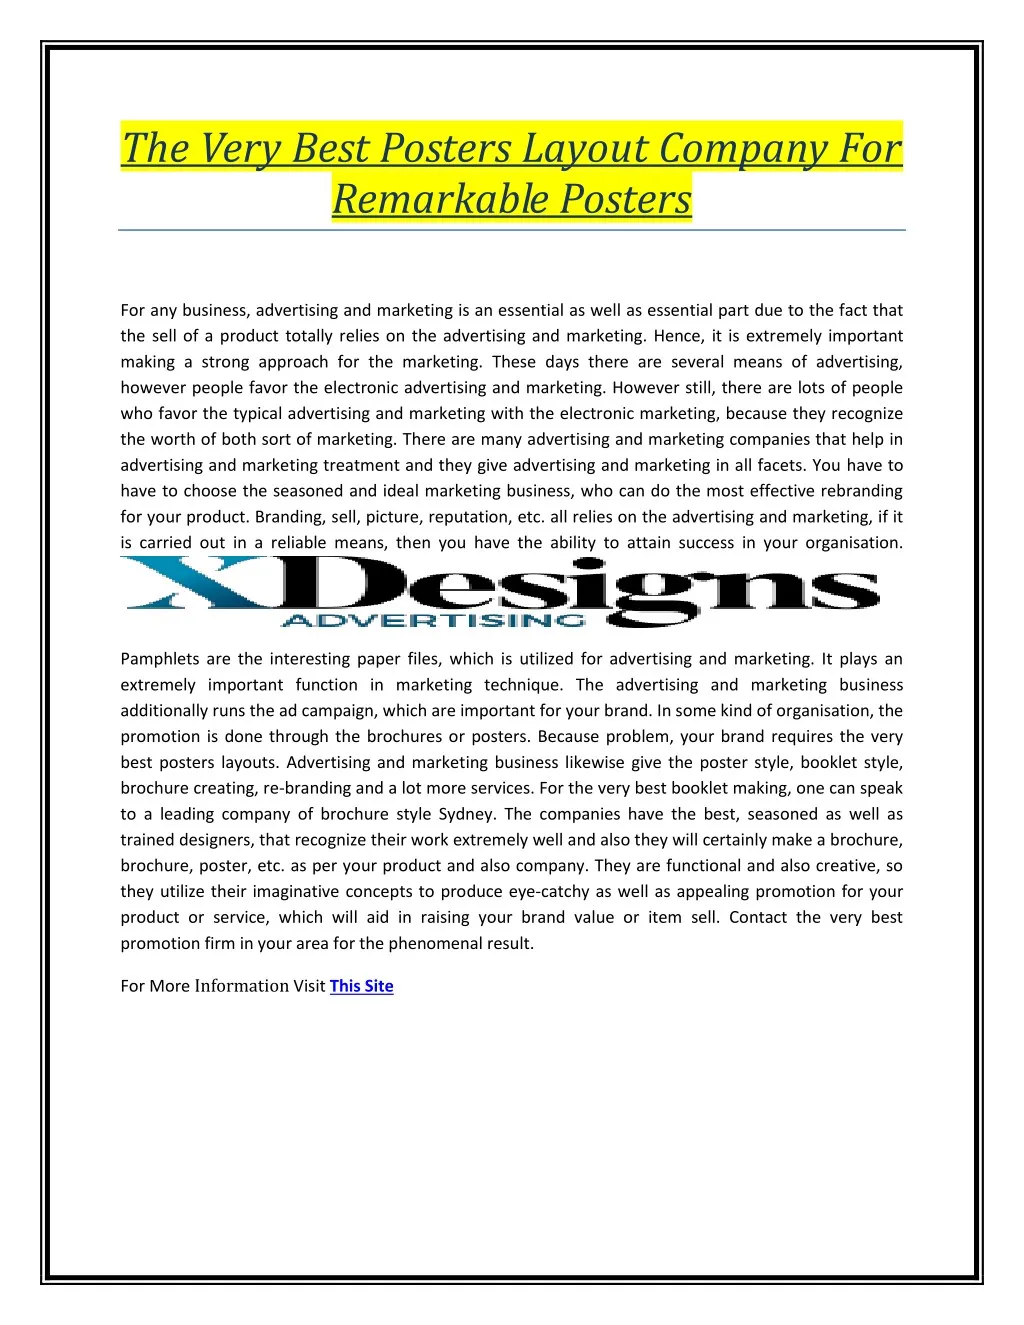 the very best posters layout company